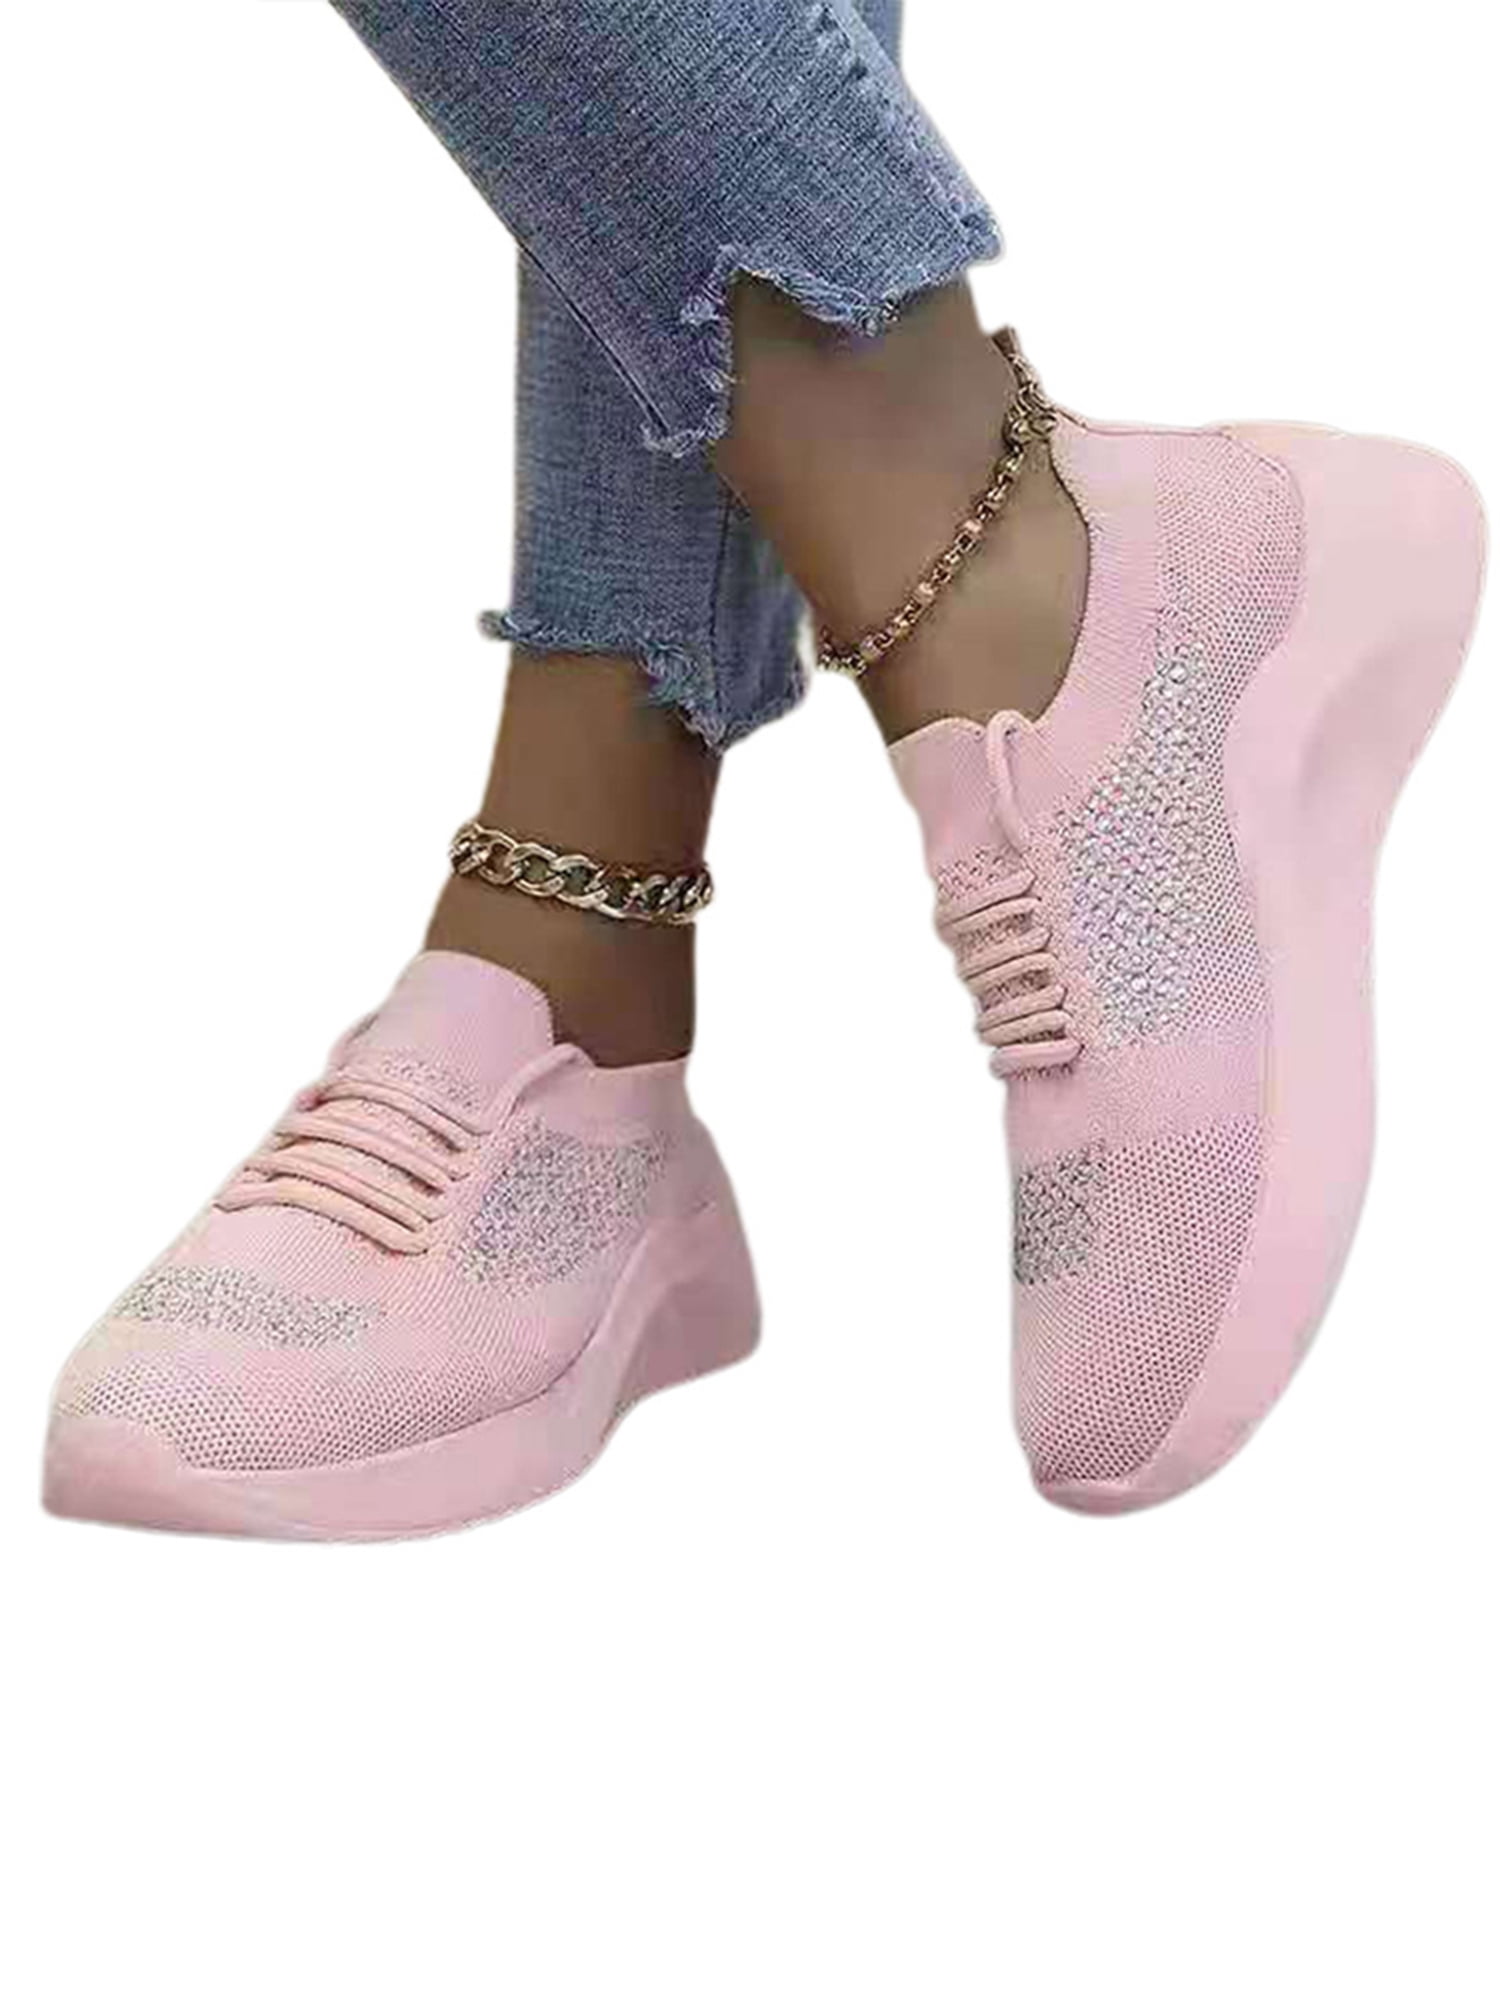 Women Running Trainers Lace Up Sneakers Sports Rhinestone Sock Comfy Shoes Size